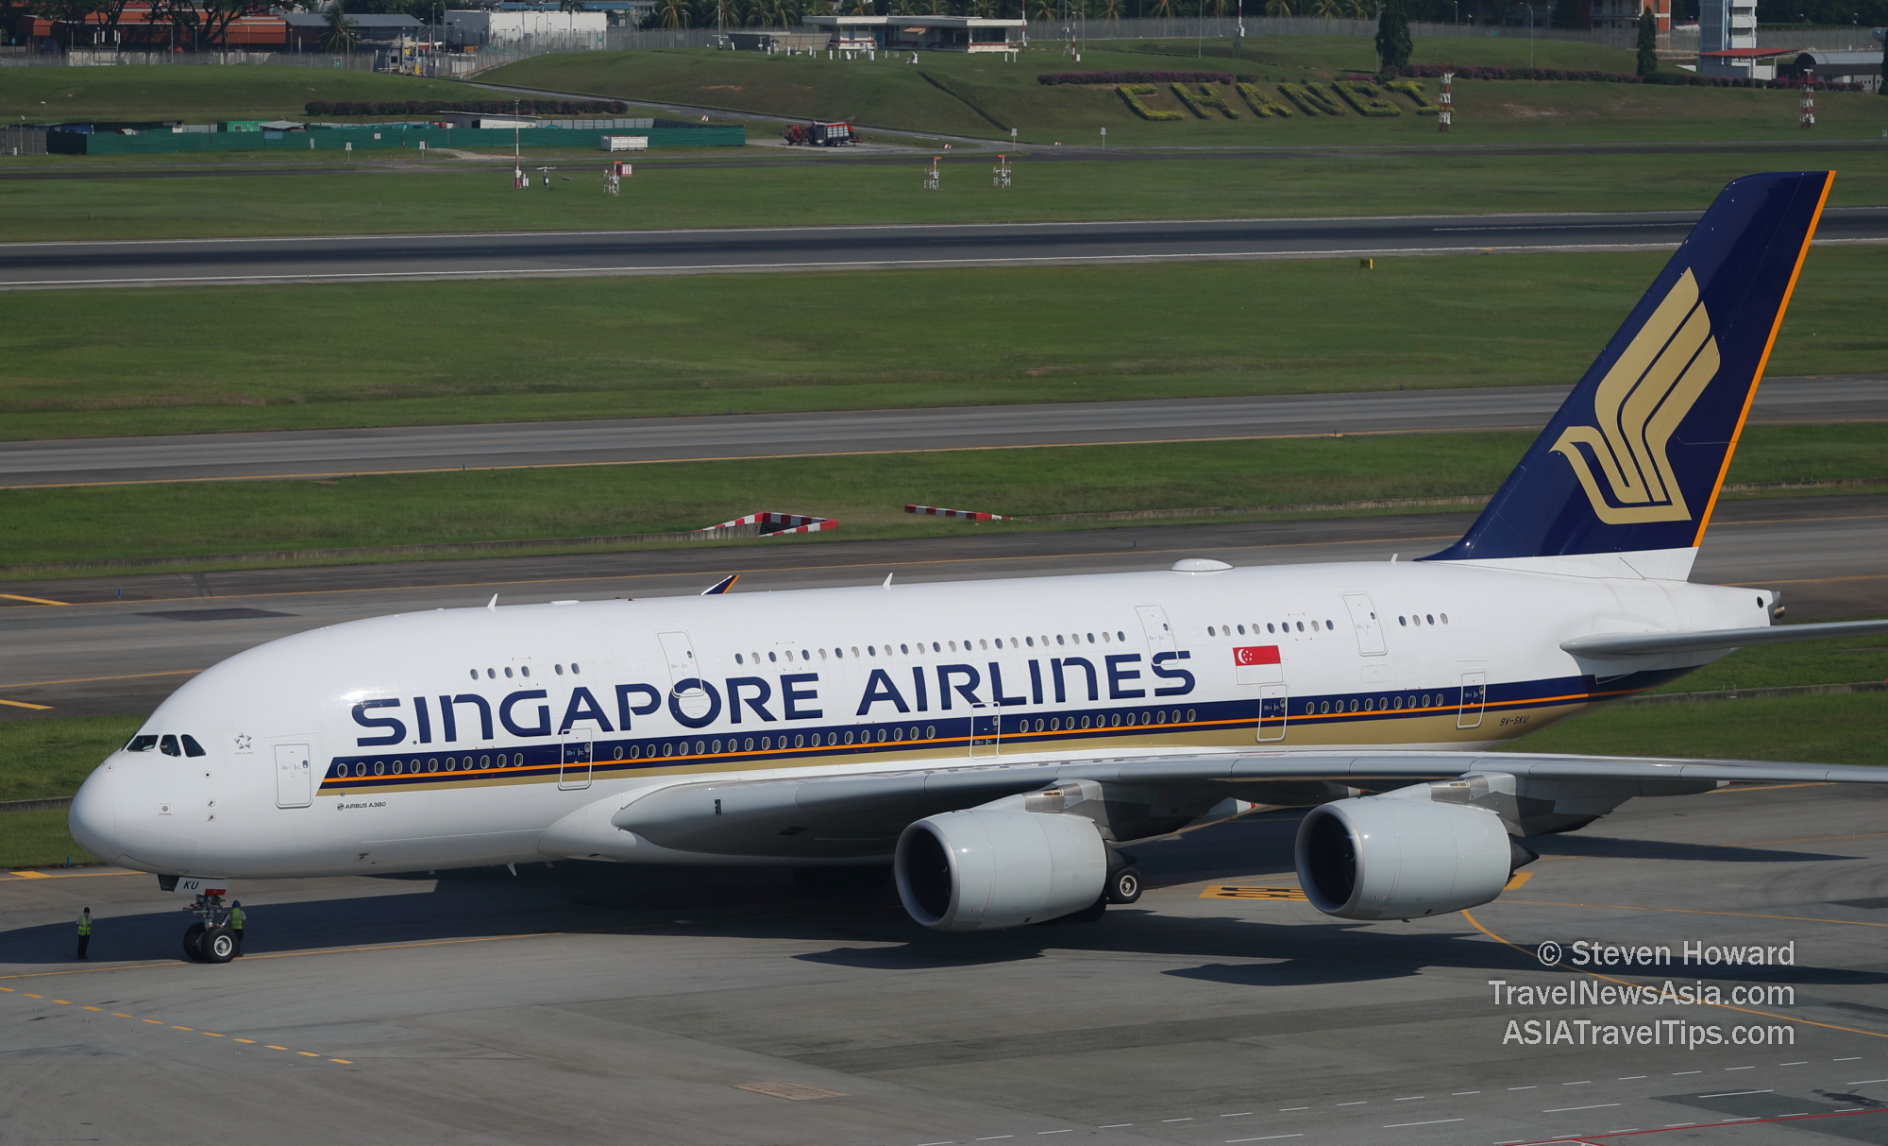 Singapore Airlines Airbus A380. Picture by Steven Howard of TravelNewsAsia.com Click to enlarge.